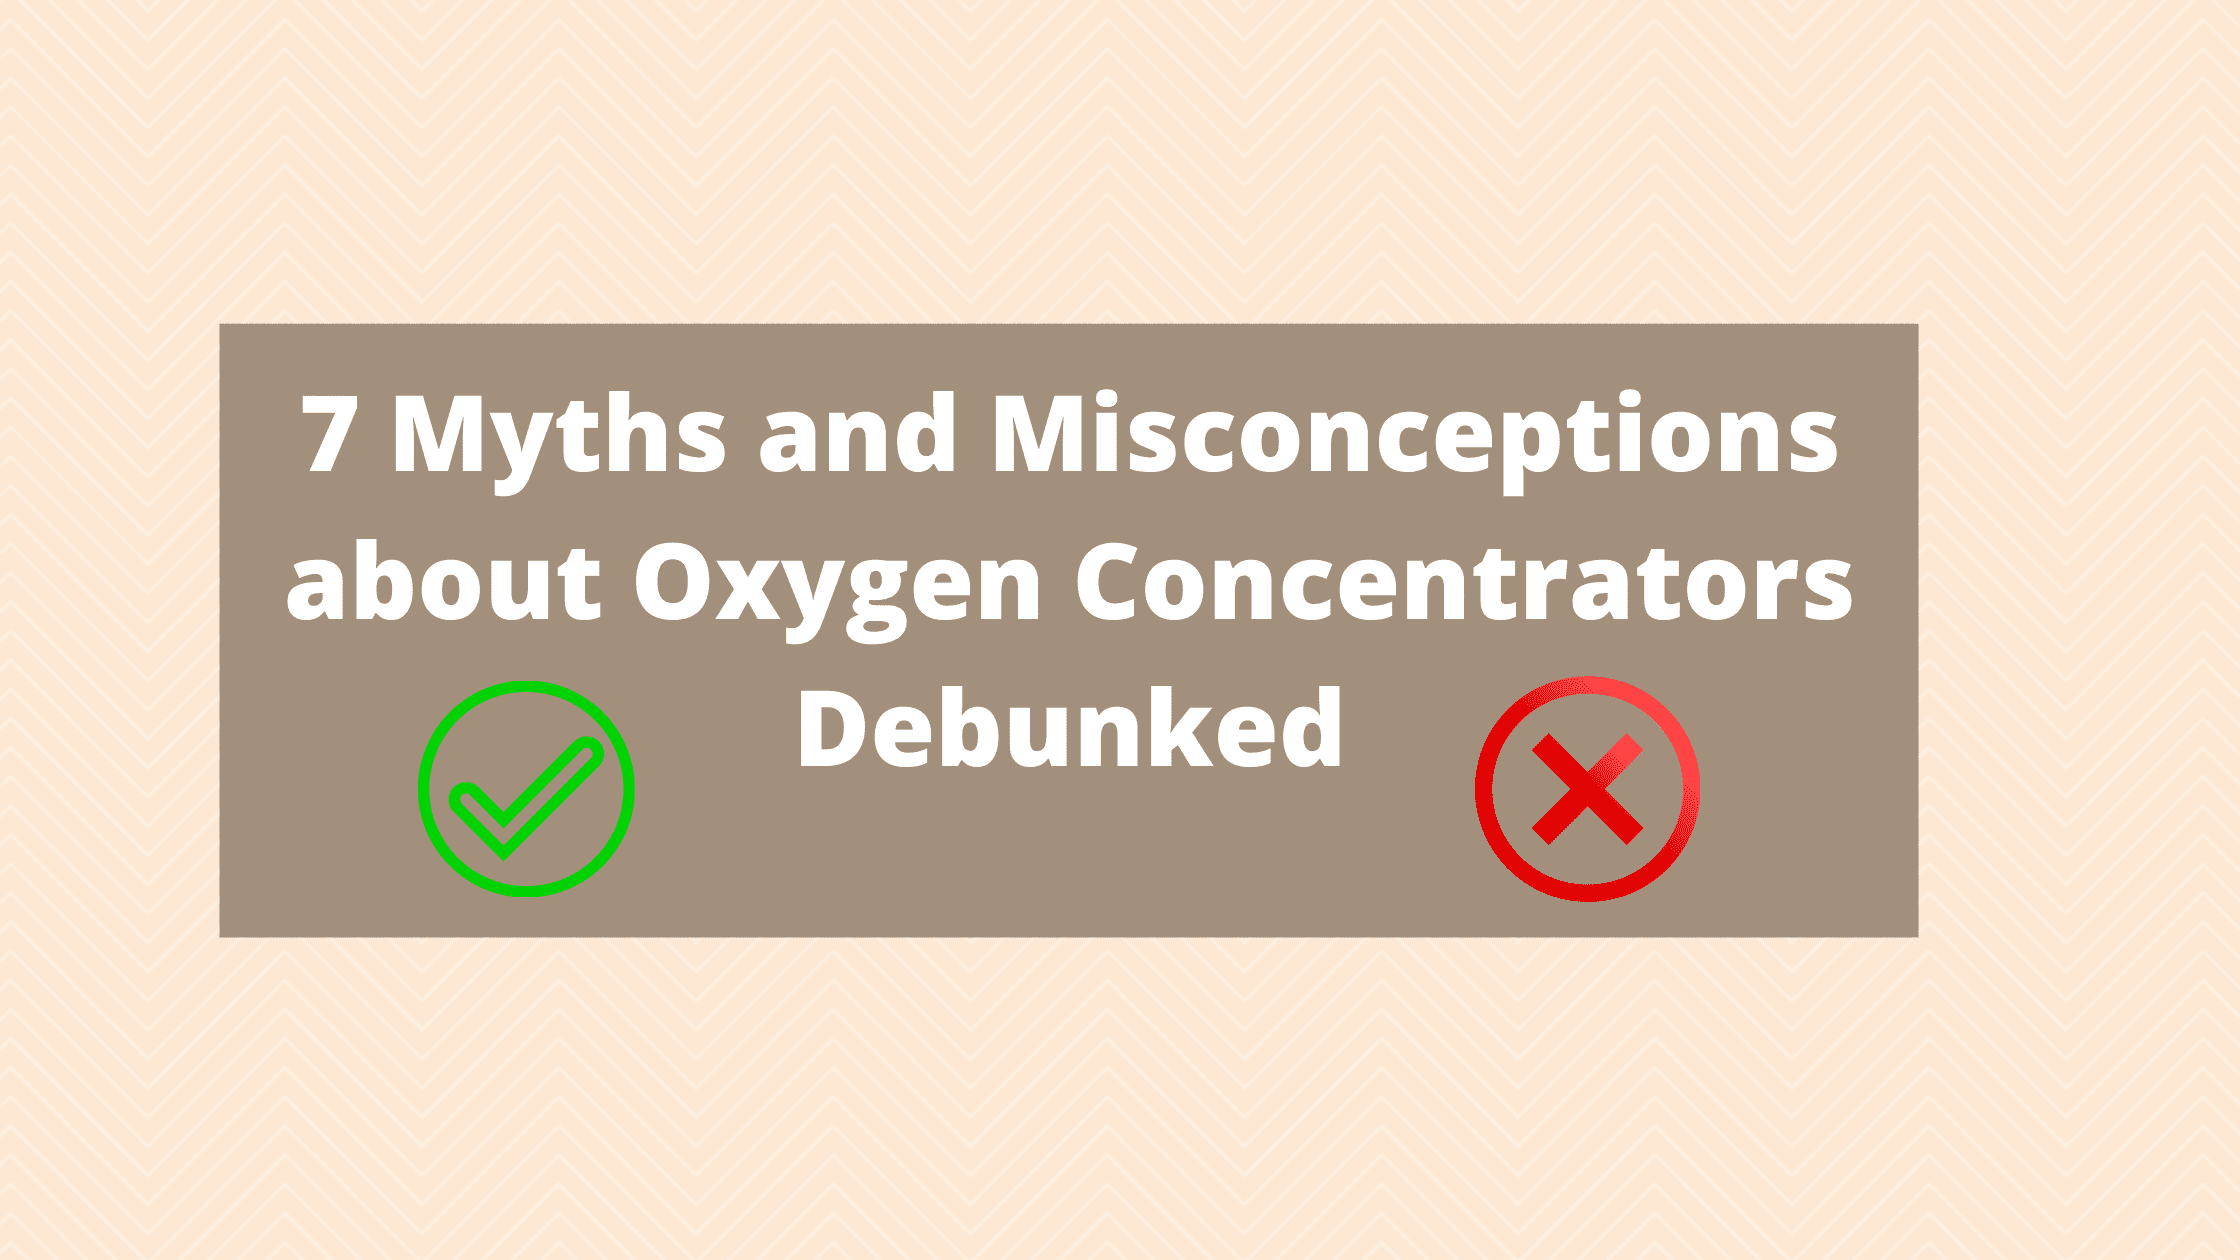 7 Myths and Misconceptions about Oxygen Concentrators Debunked